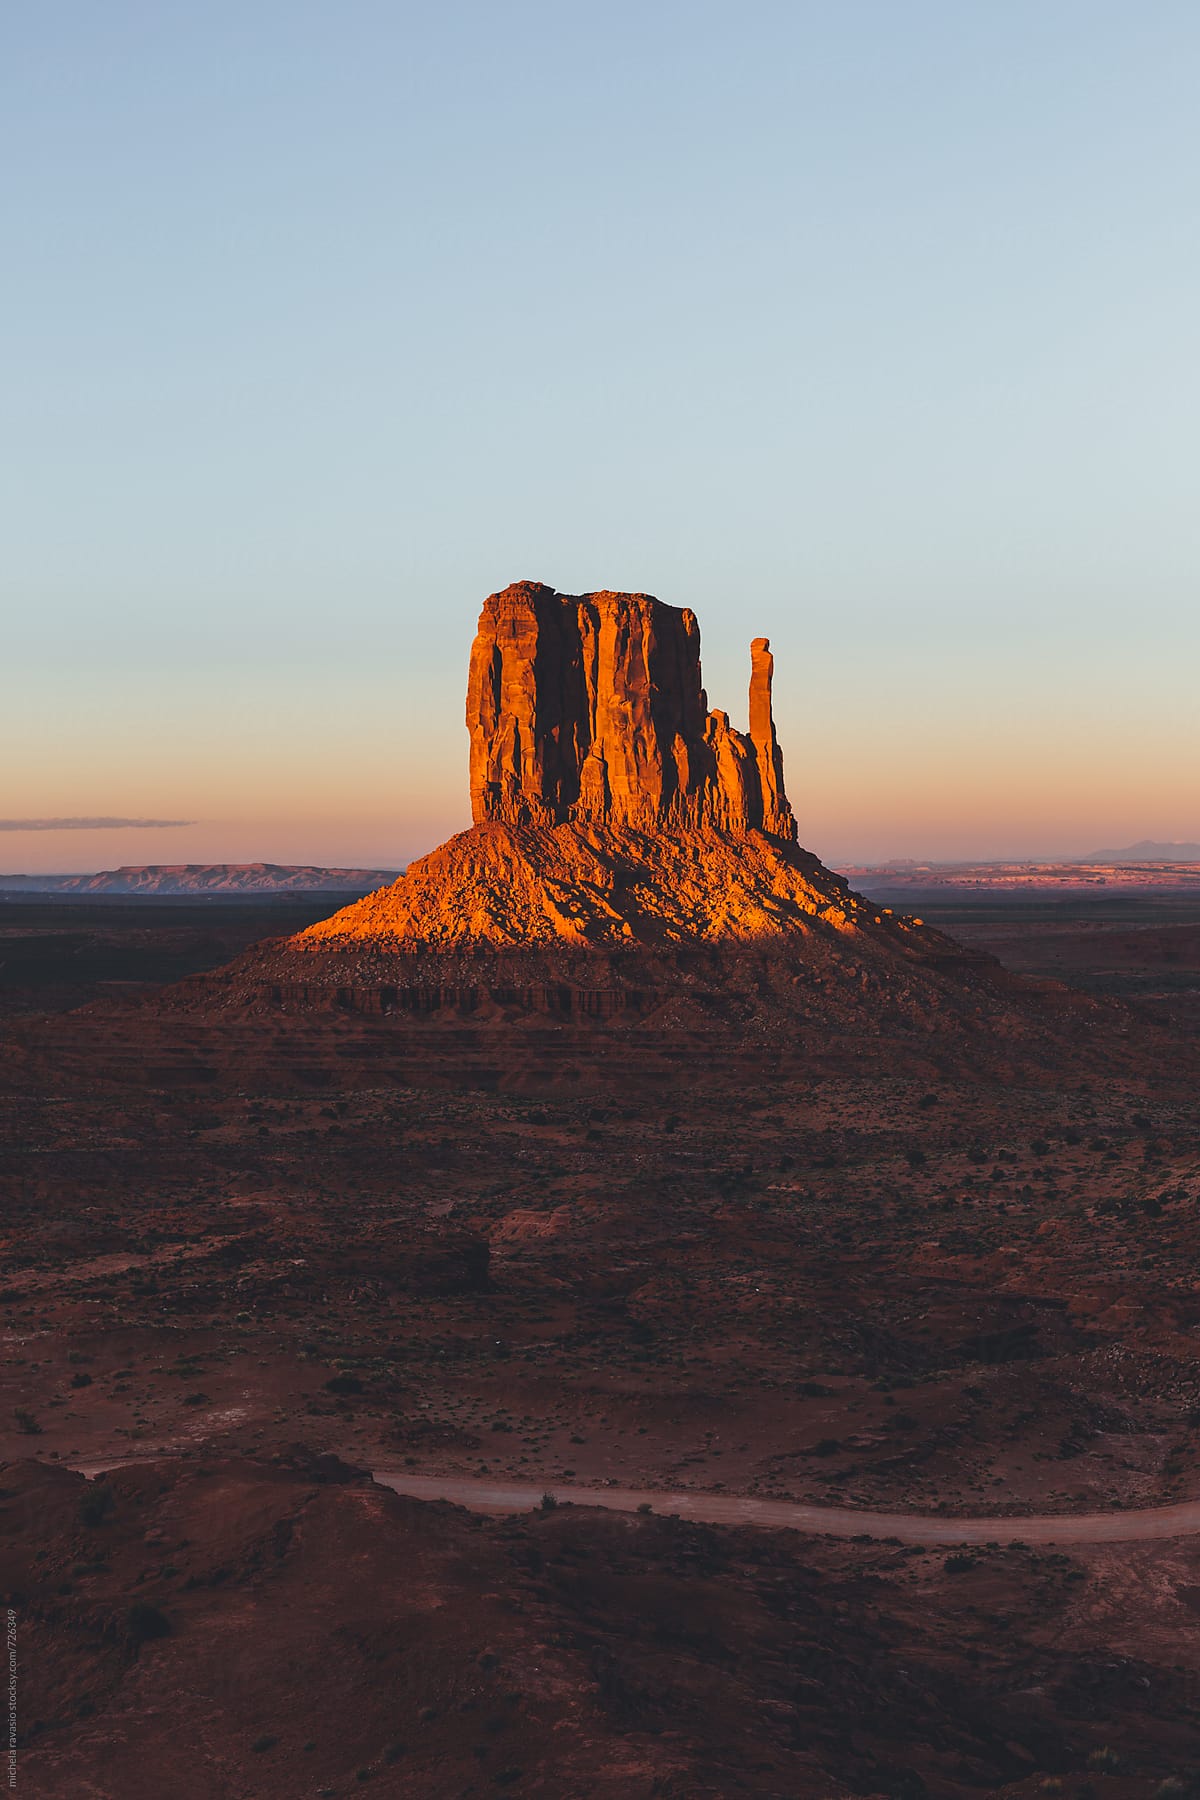 View of West Mitten in Monument Valley at sunset